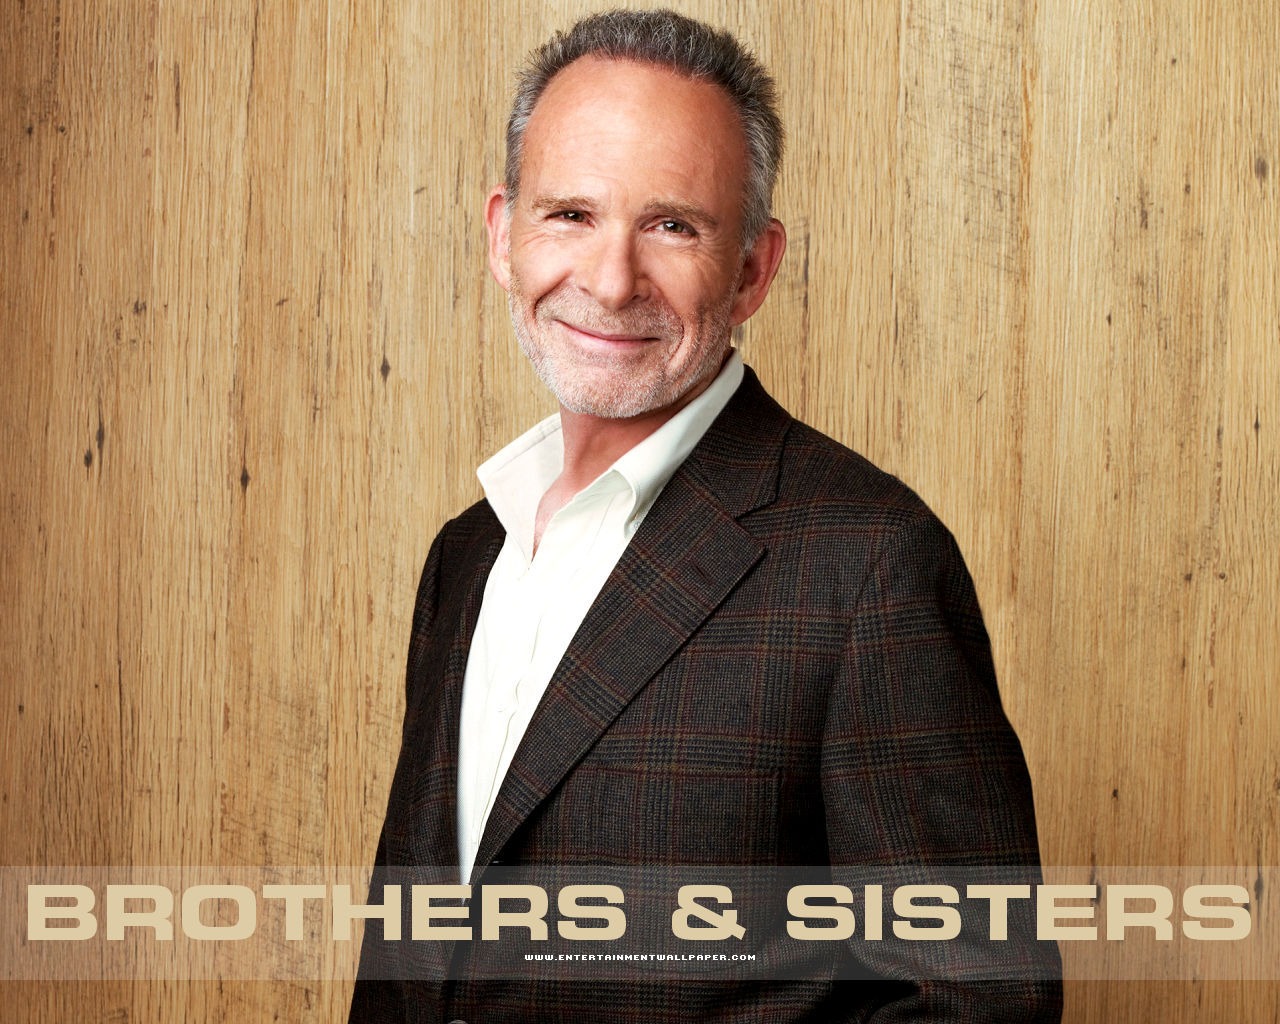 Brothers & Sisters wallpaper #21 - 1280x1024